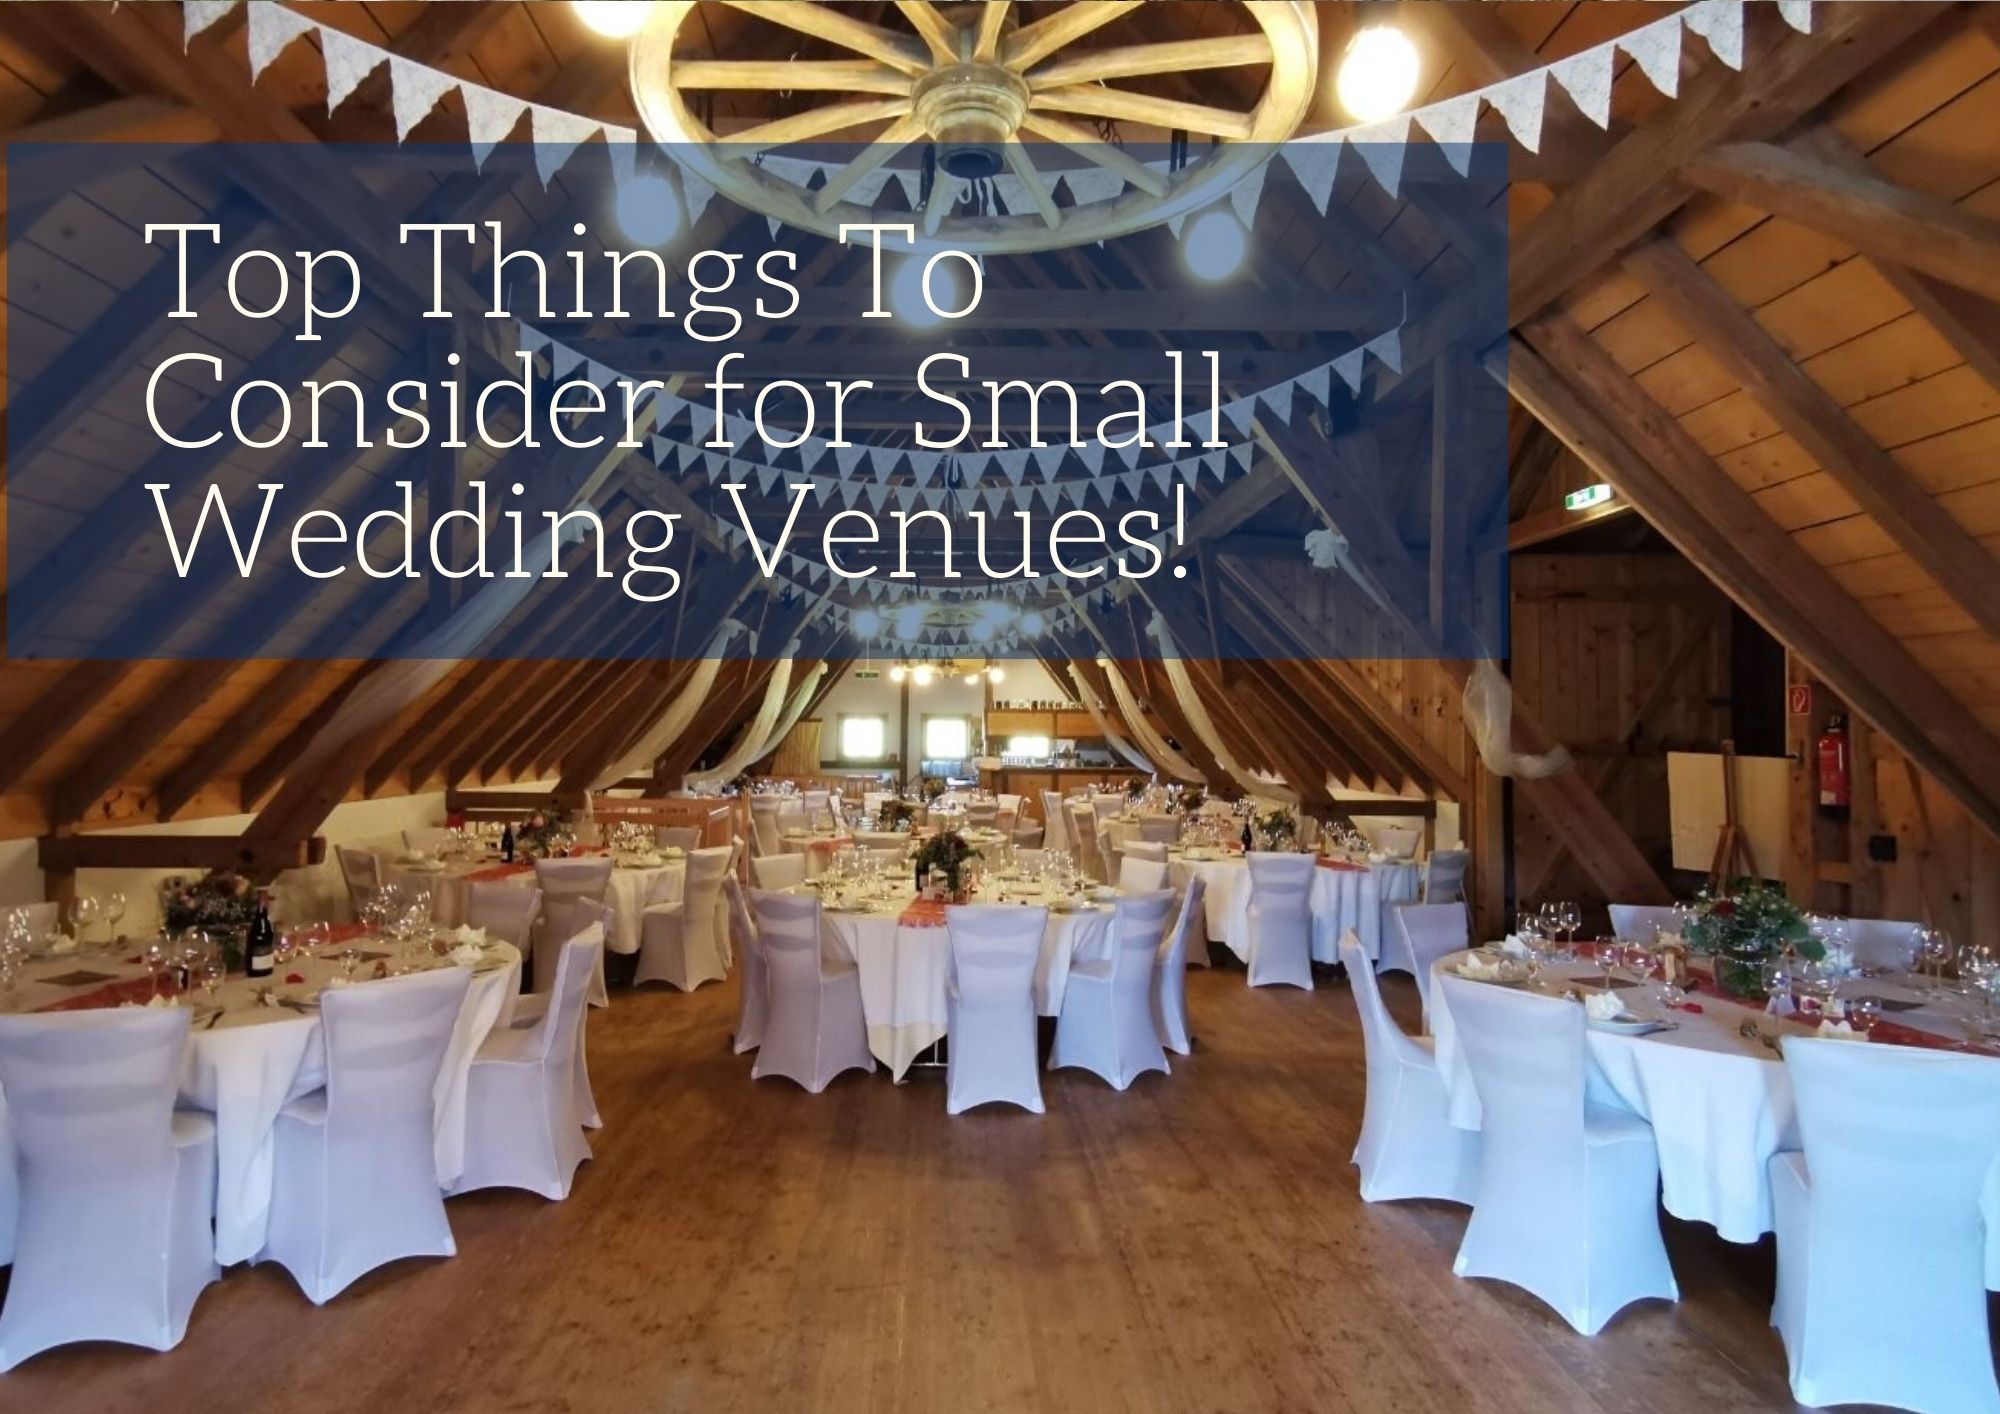 Top Things To Consider for Small Wedding Venues!